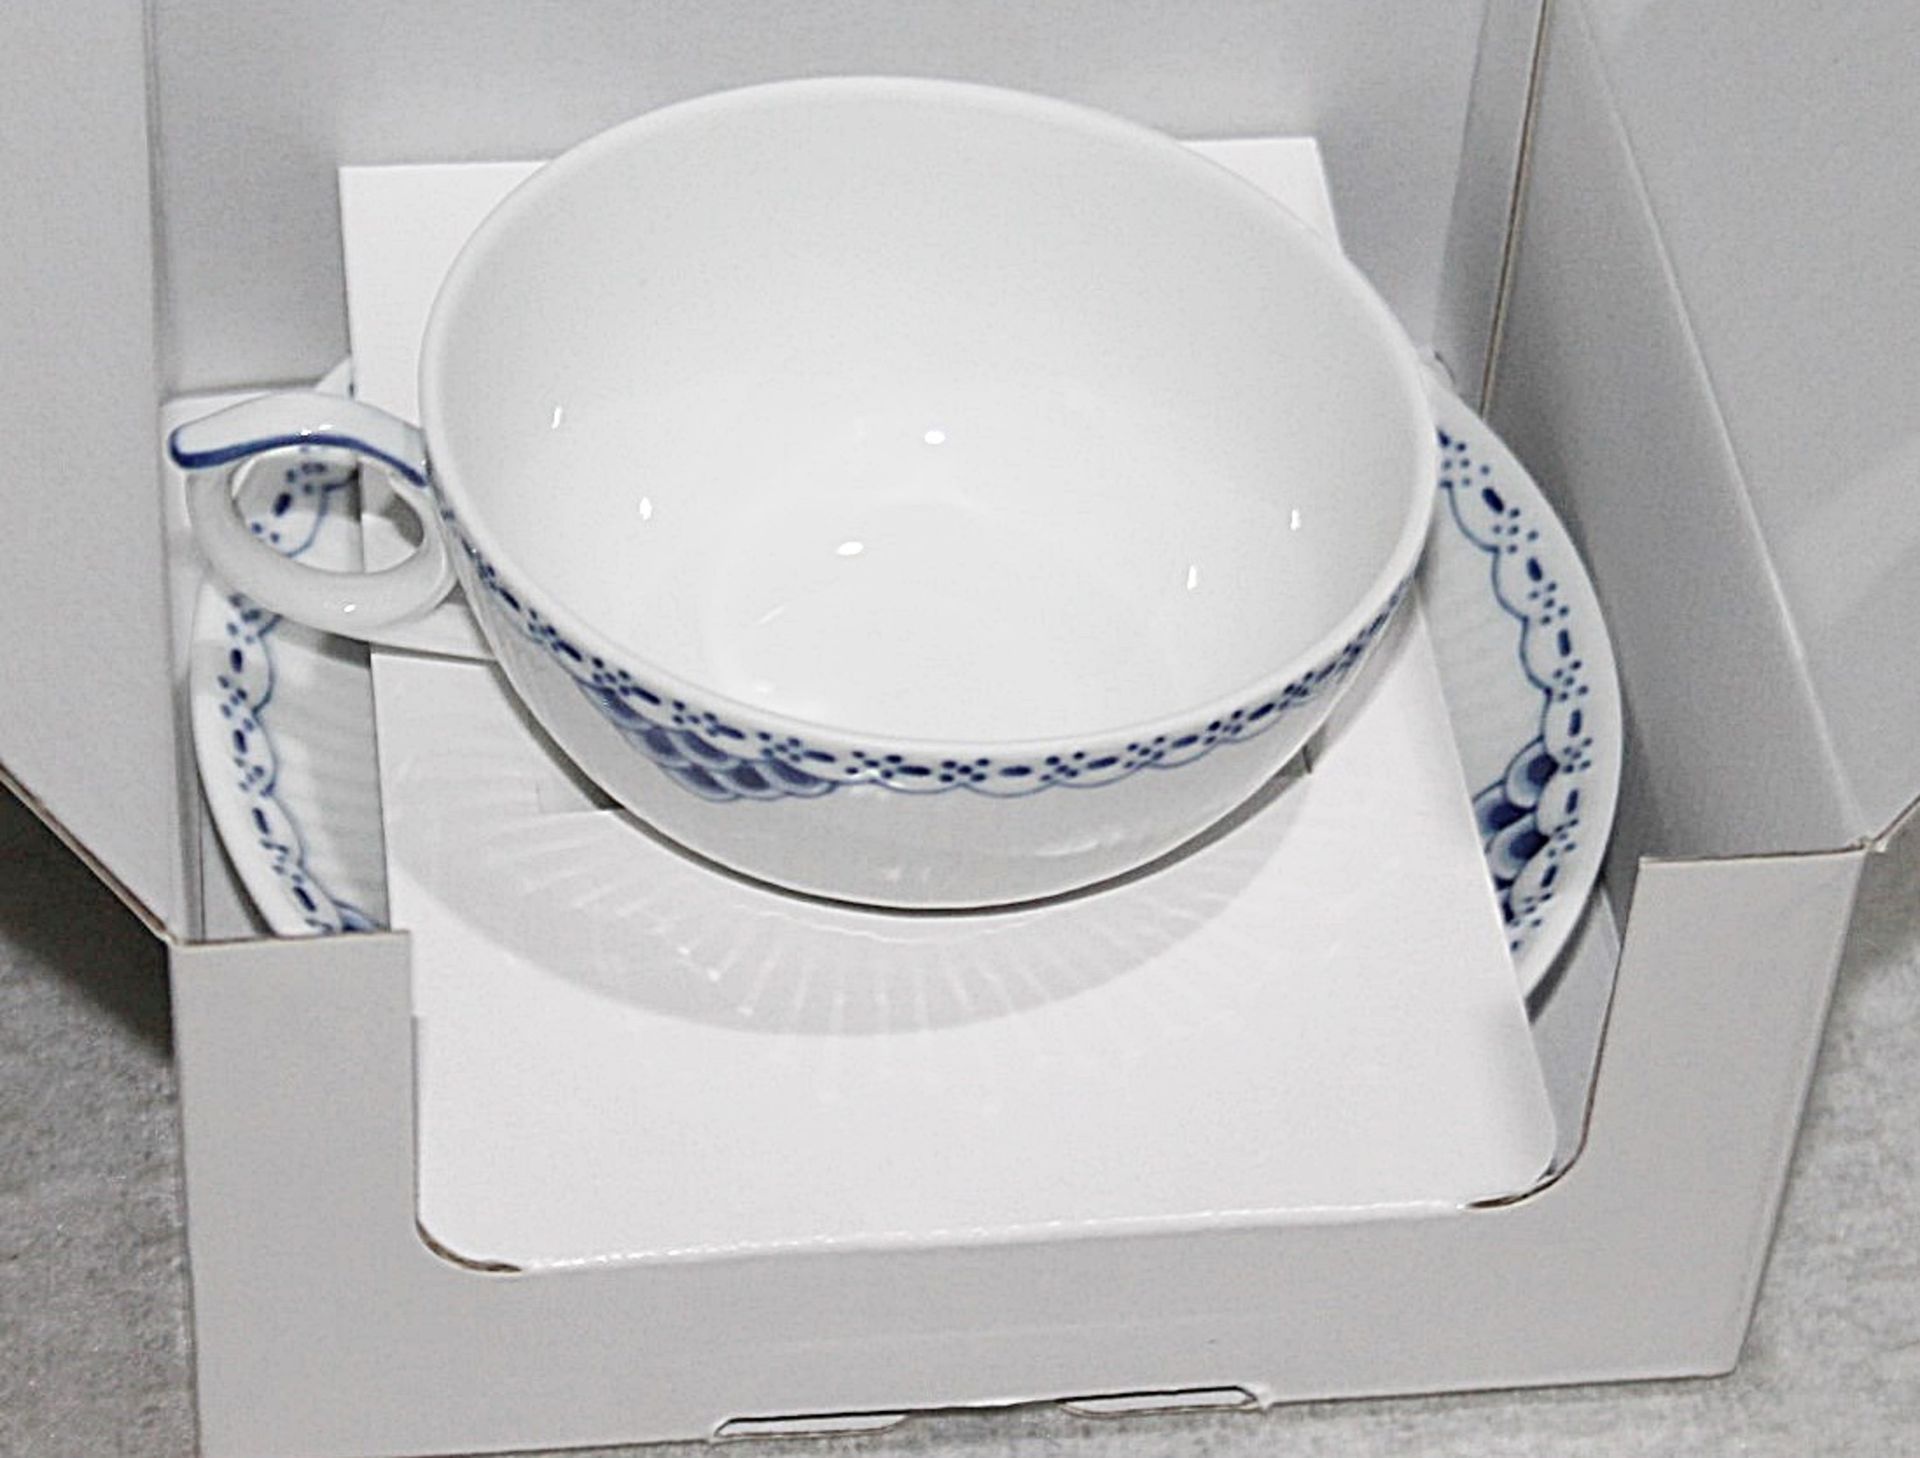 1 x ROYAL COPENHAGEN Princess Teacup and Saucer - Capacity: 200ml - Unused Boxed Stock - Ref: - Image 9 of 10